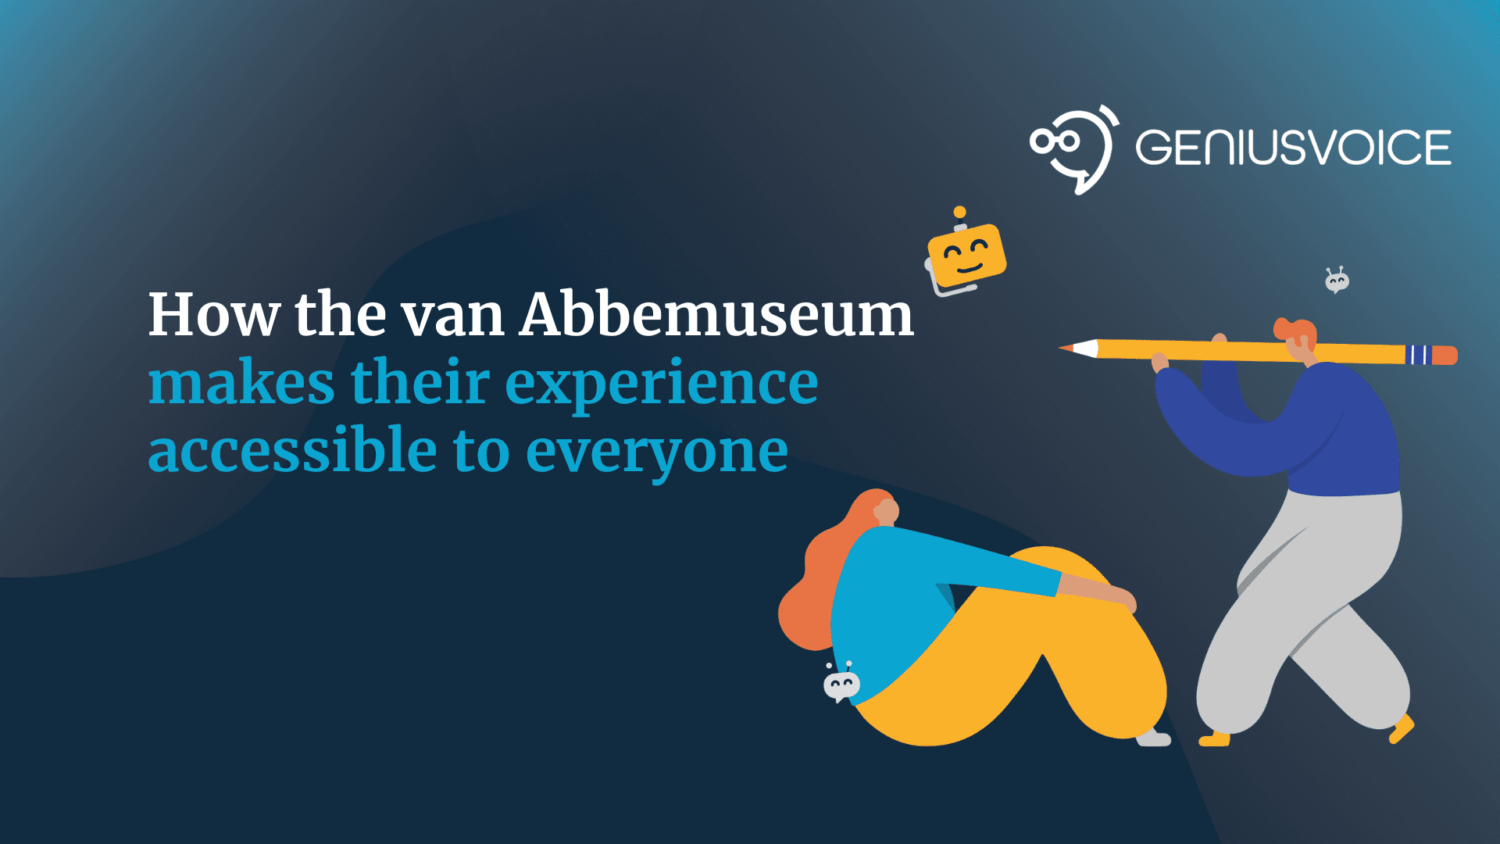 How the van Abbemuseum makes their experience accessible to everyone